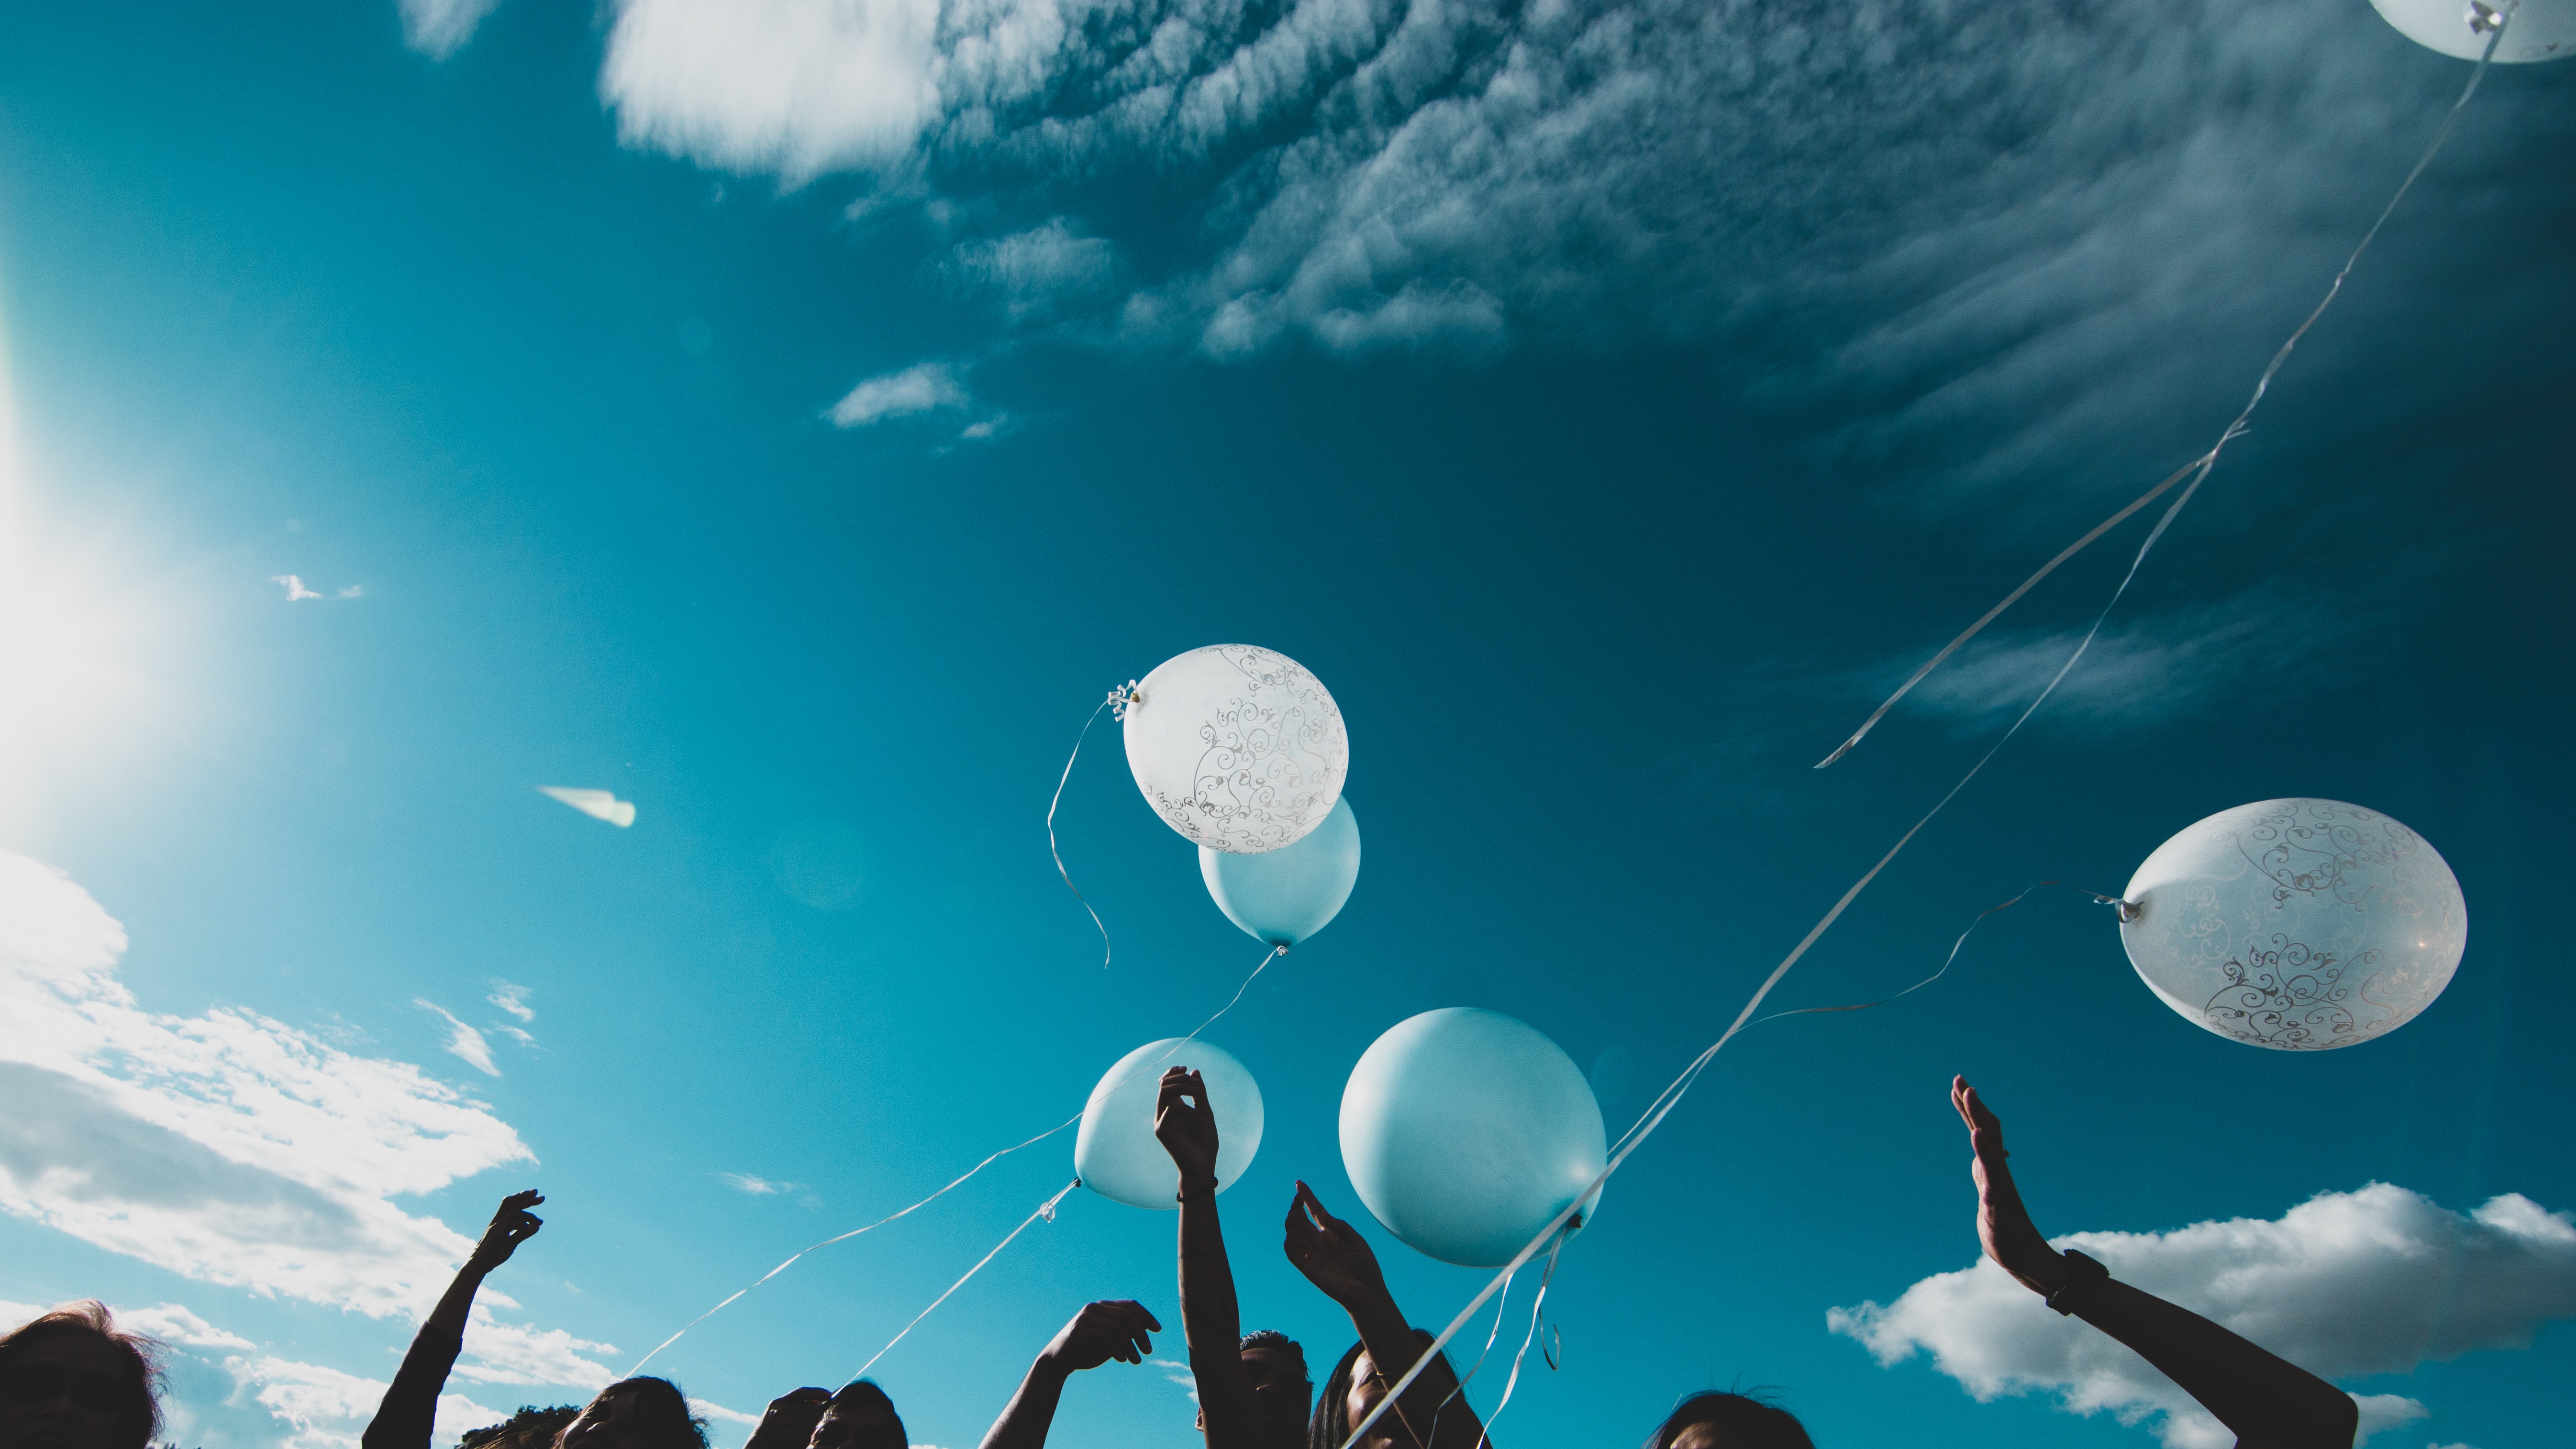 balloons, air balloons, people, sky, miscellanea, miscellaneous, hands, fly, to fly